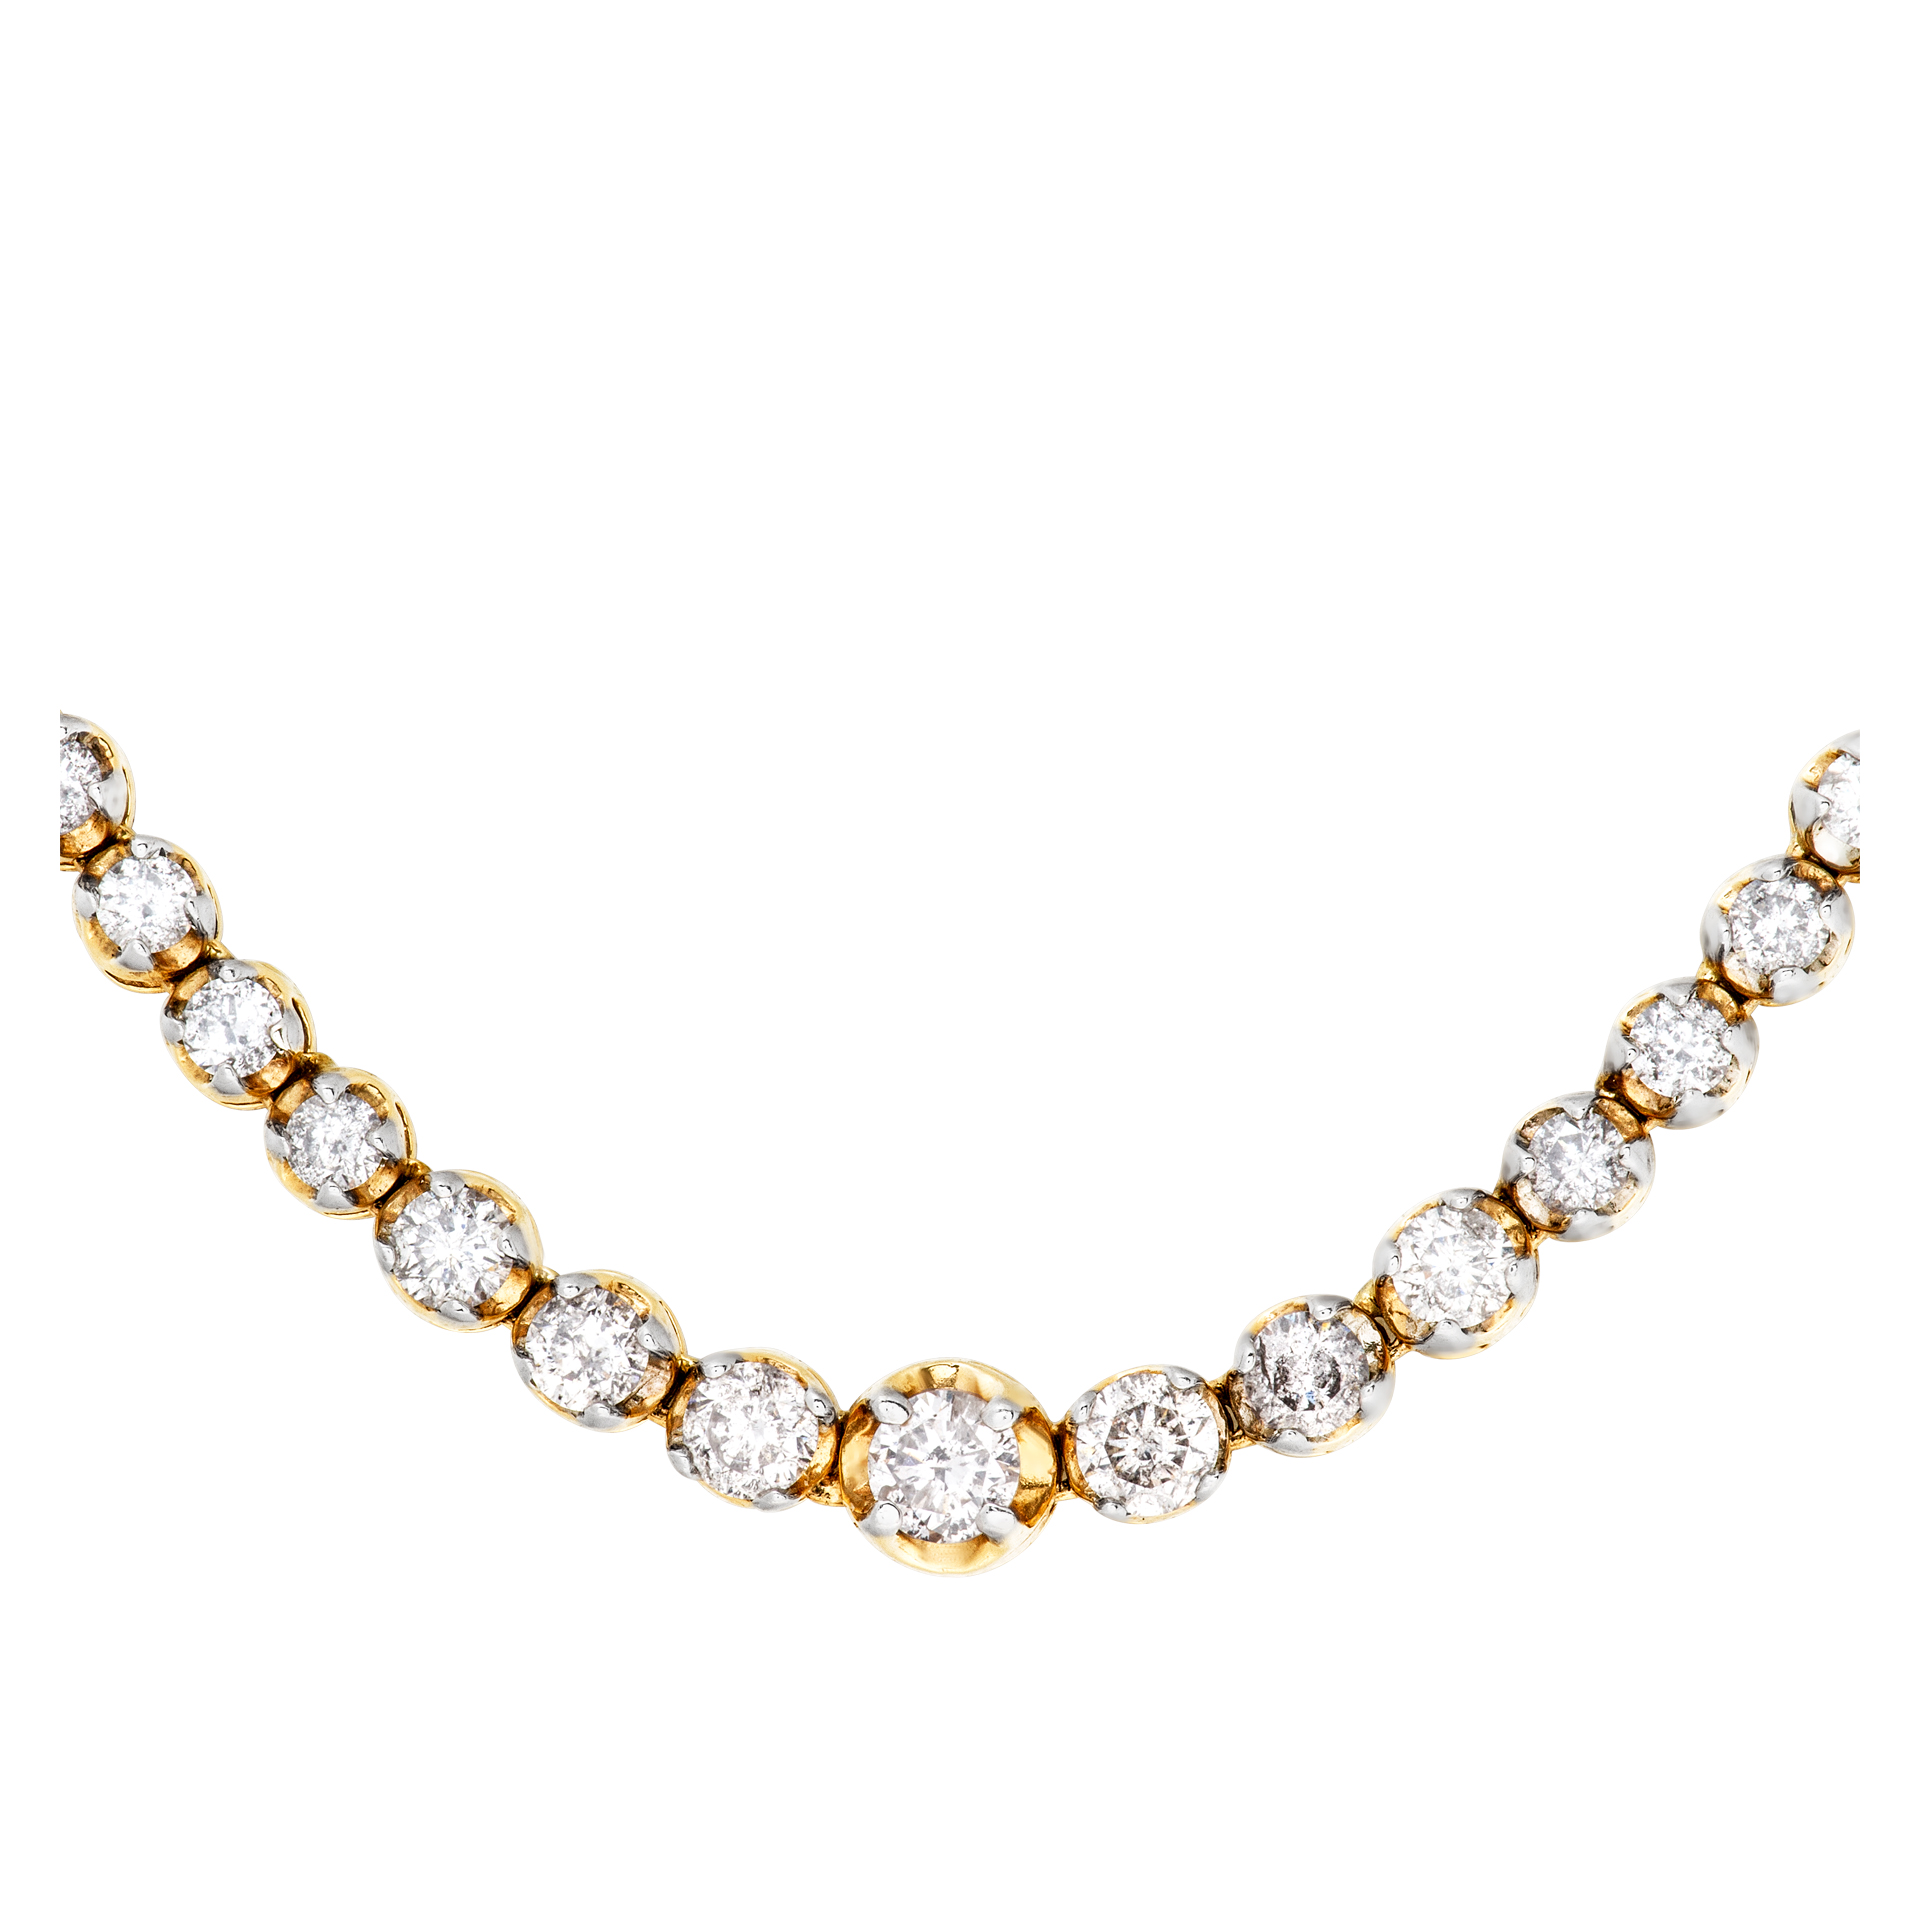 Diamond line necklace in 14k gold. 2.00 carats in diamonds image 1